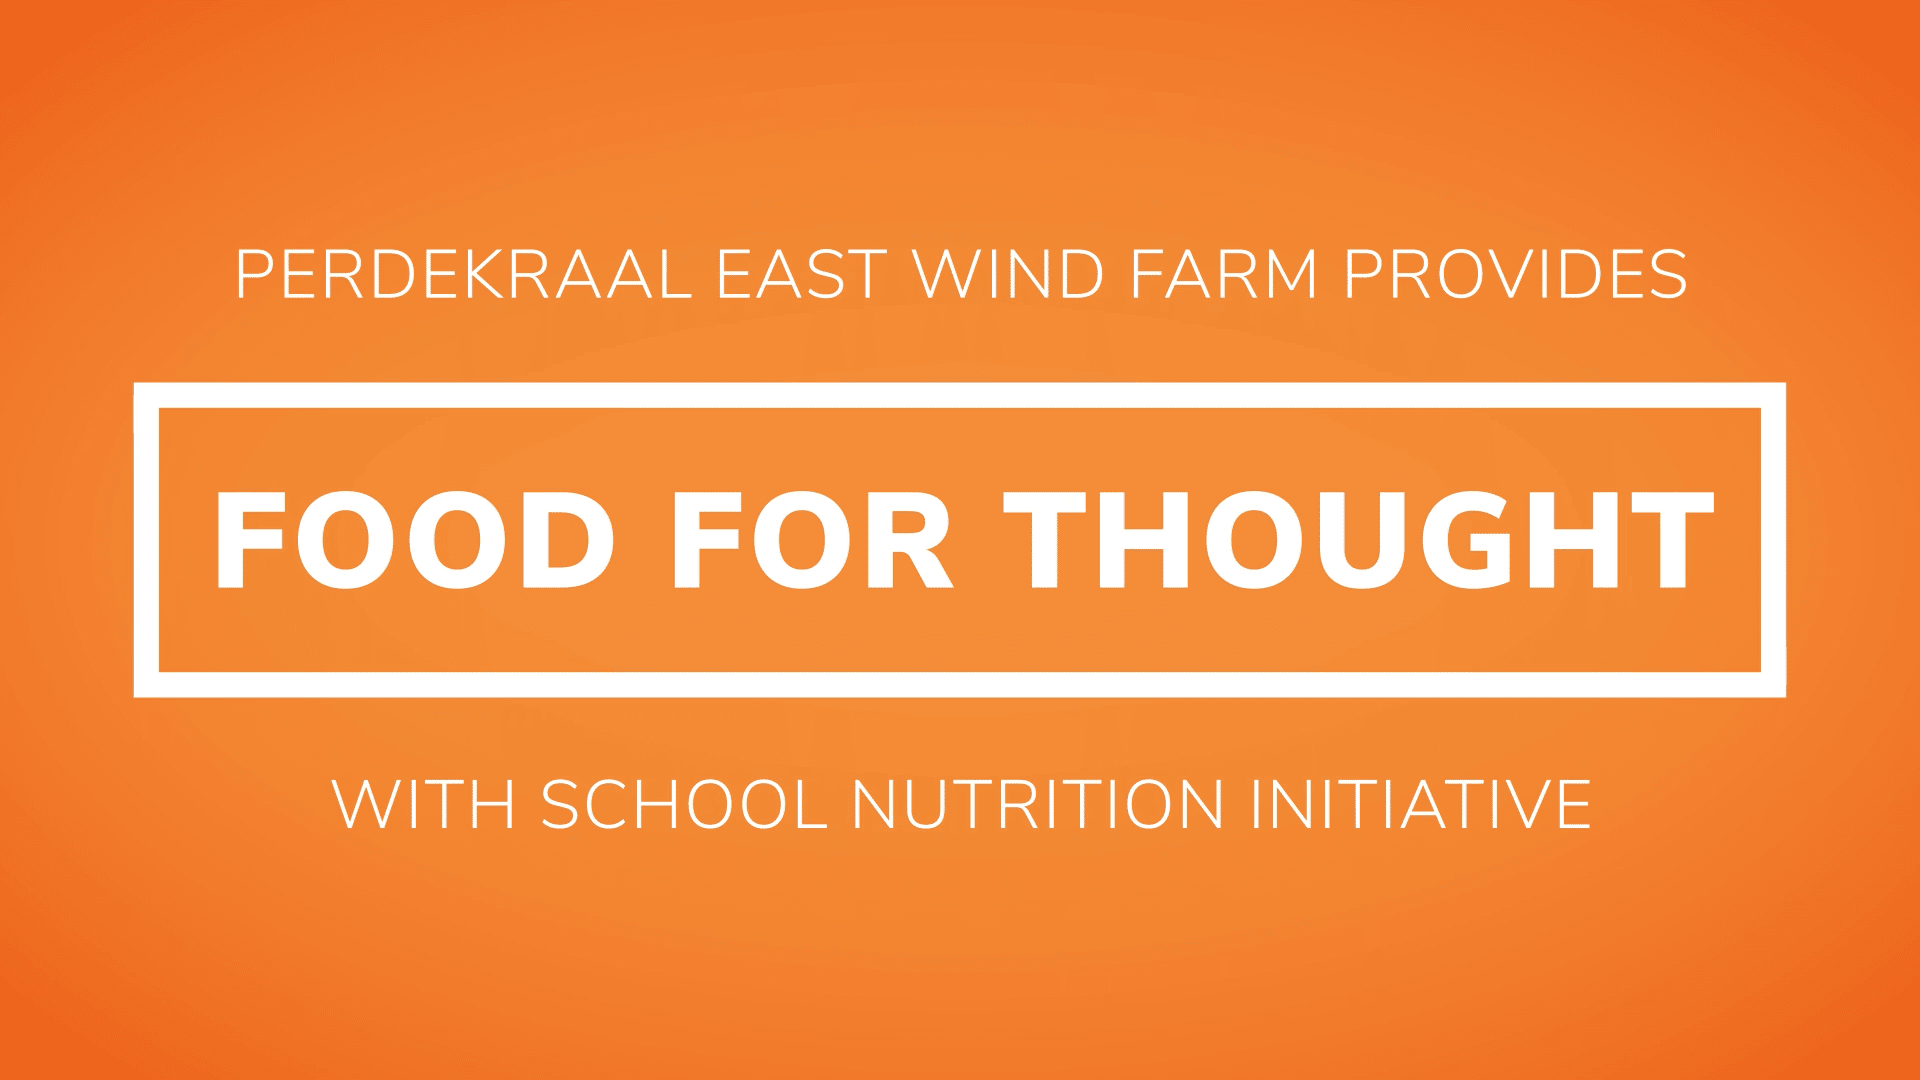 'Perdekraal East Wind Farm provides Food for Though with school nutrition initiative' video thumbnail